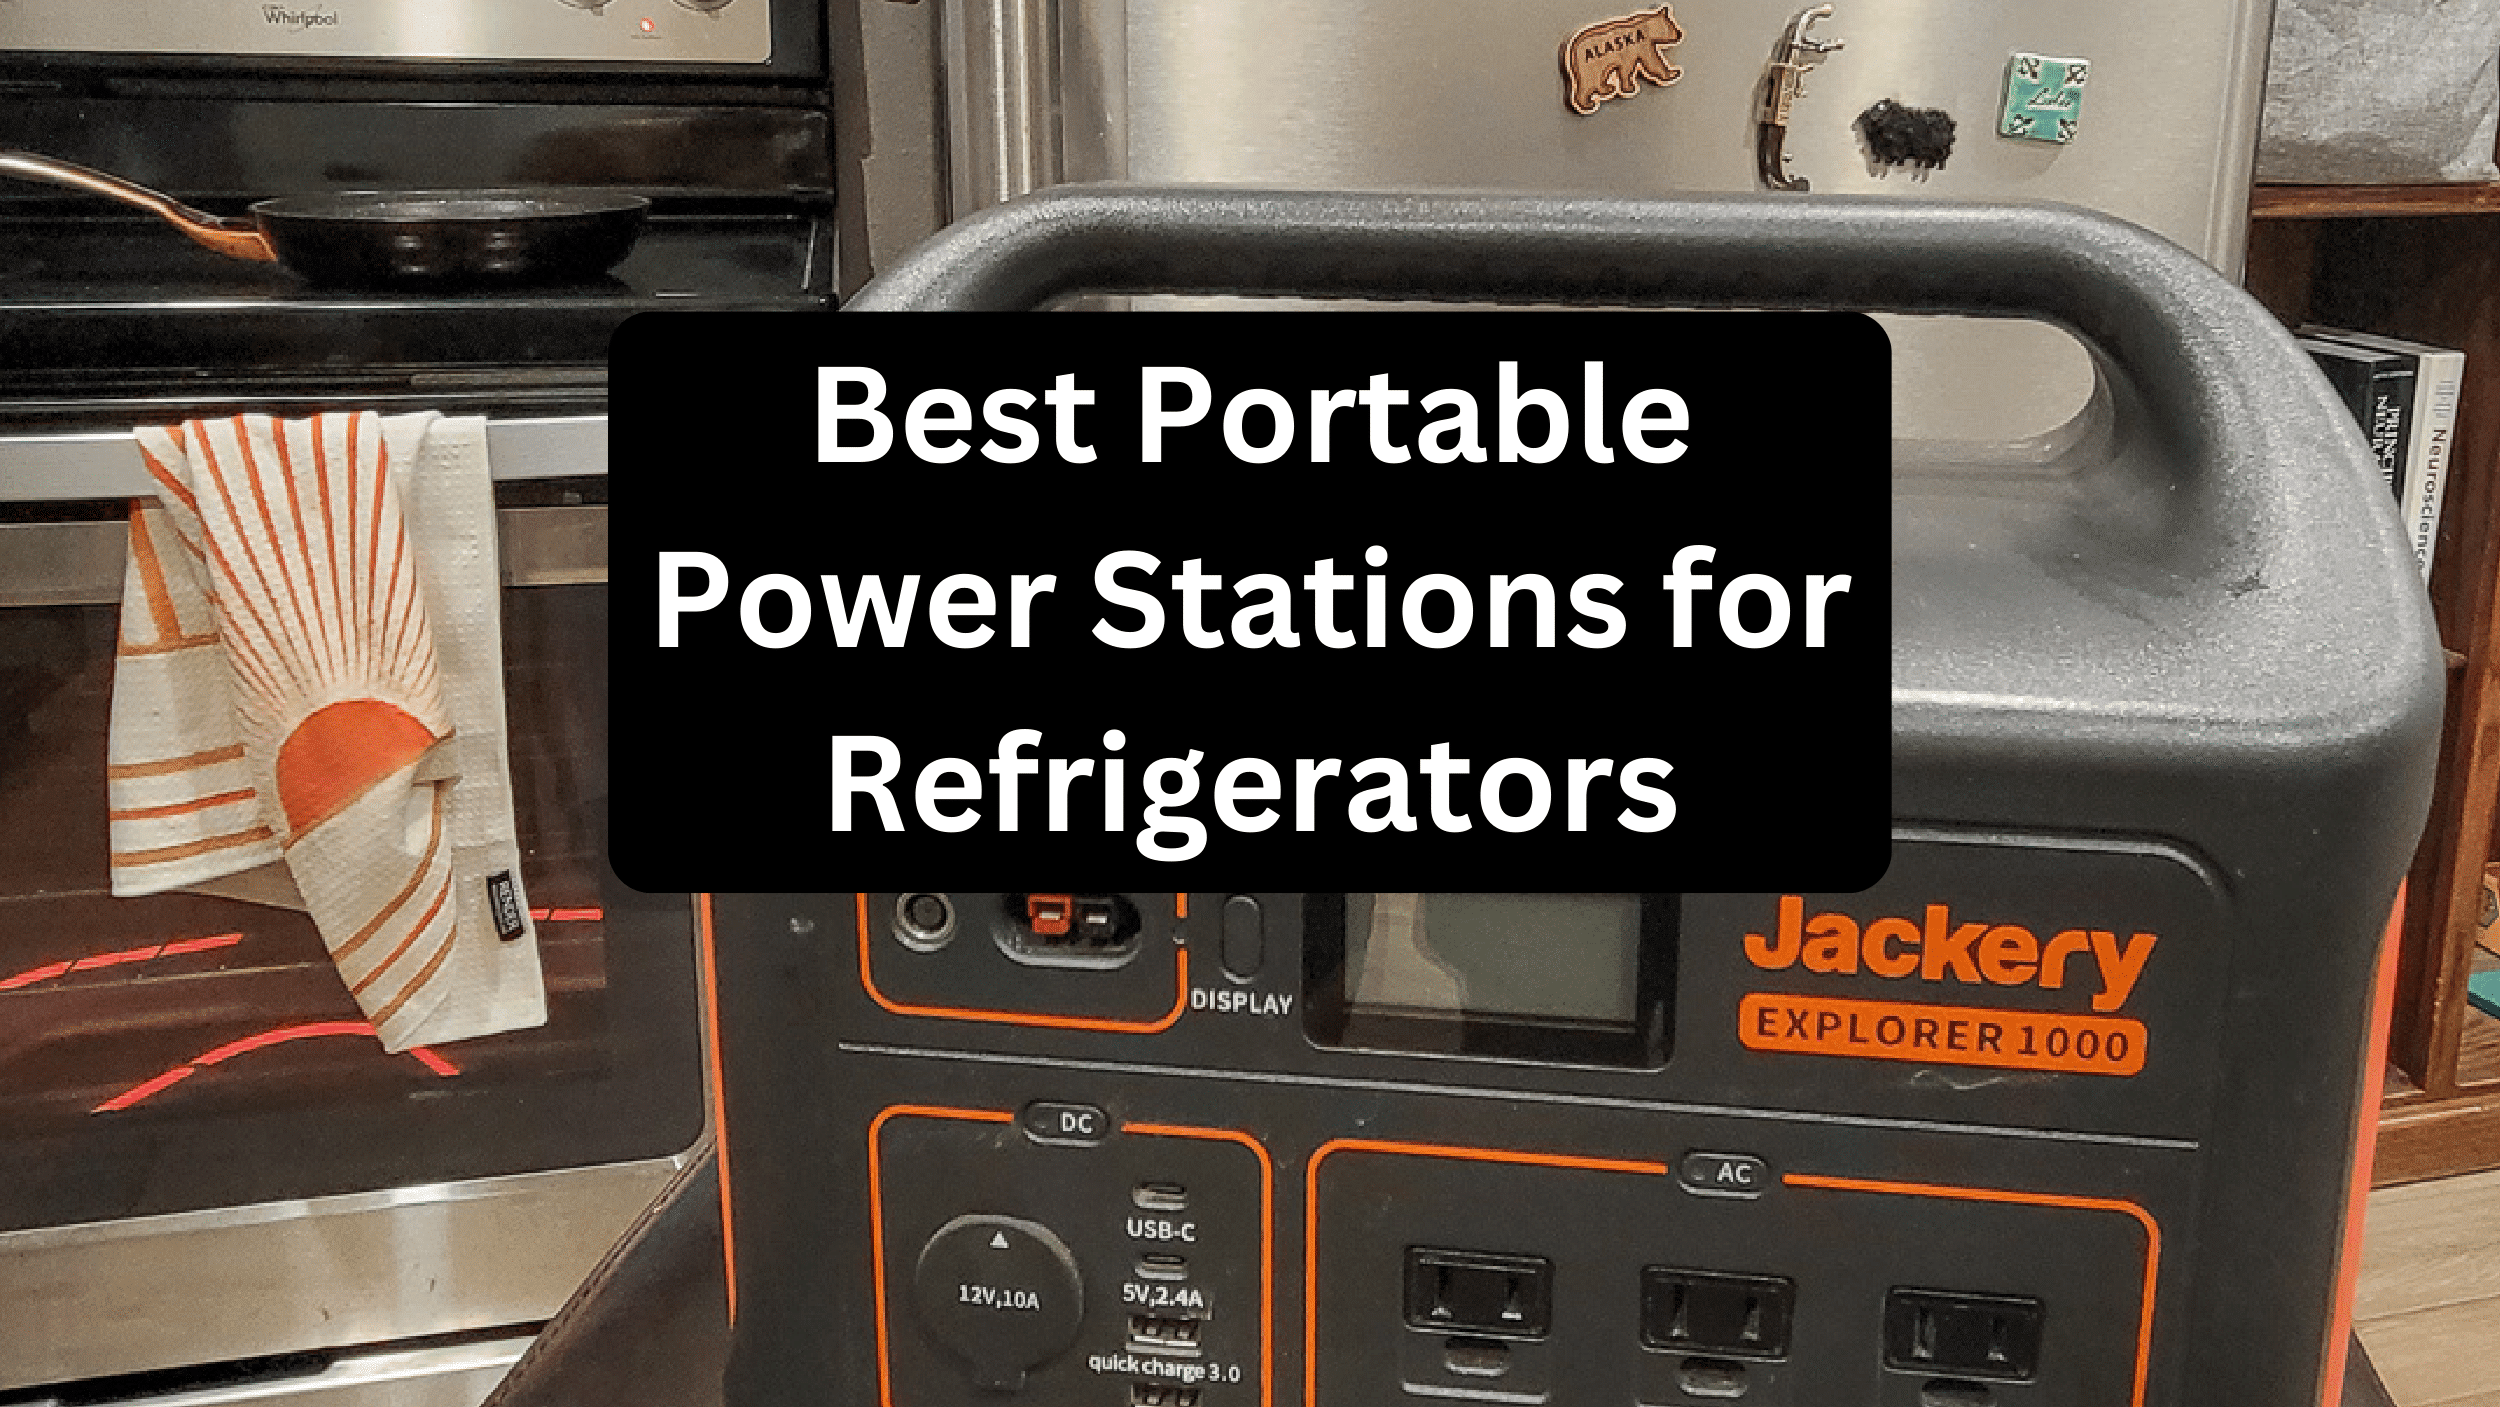 Best Power Station for Fridge: Preventing Food Spoilage in Power Outages